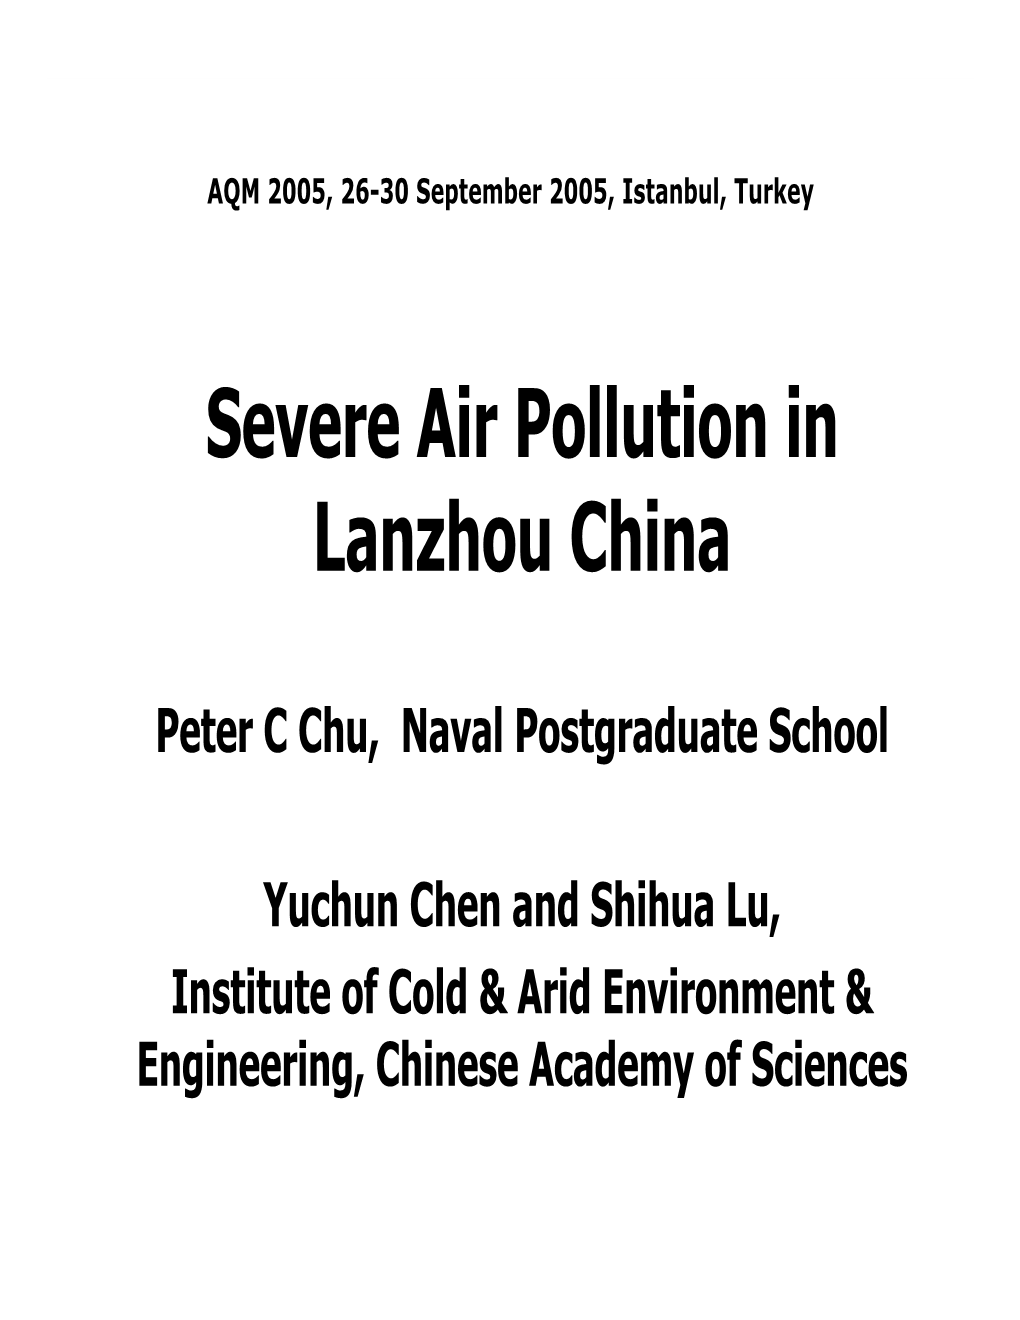 Severe Particulate Pollution in Lanzhou China